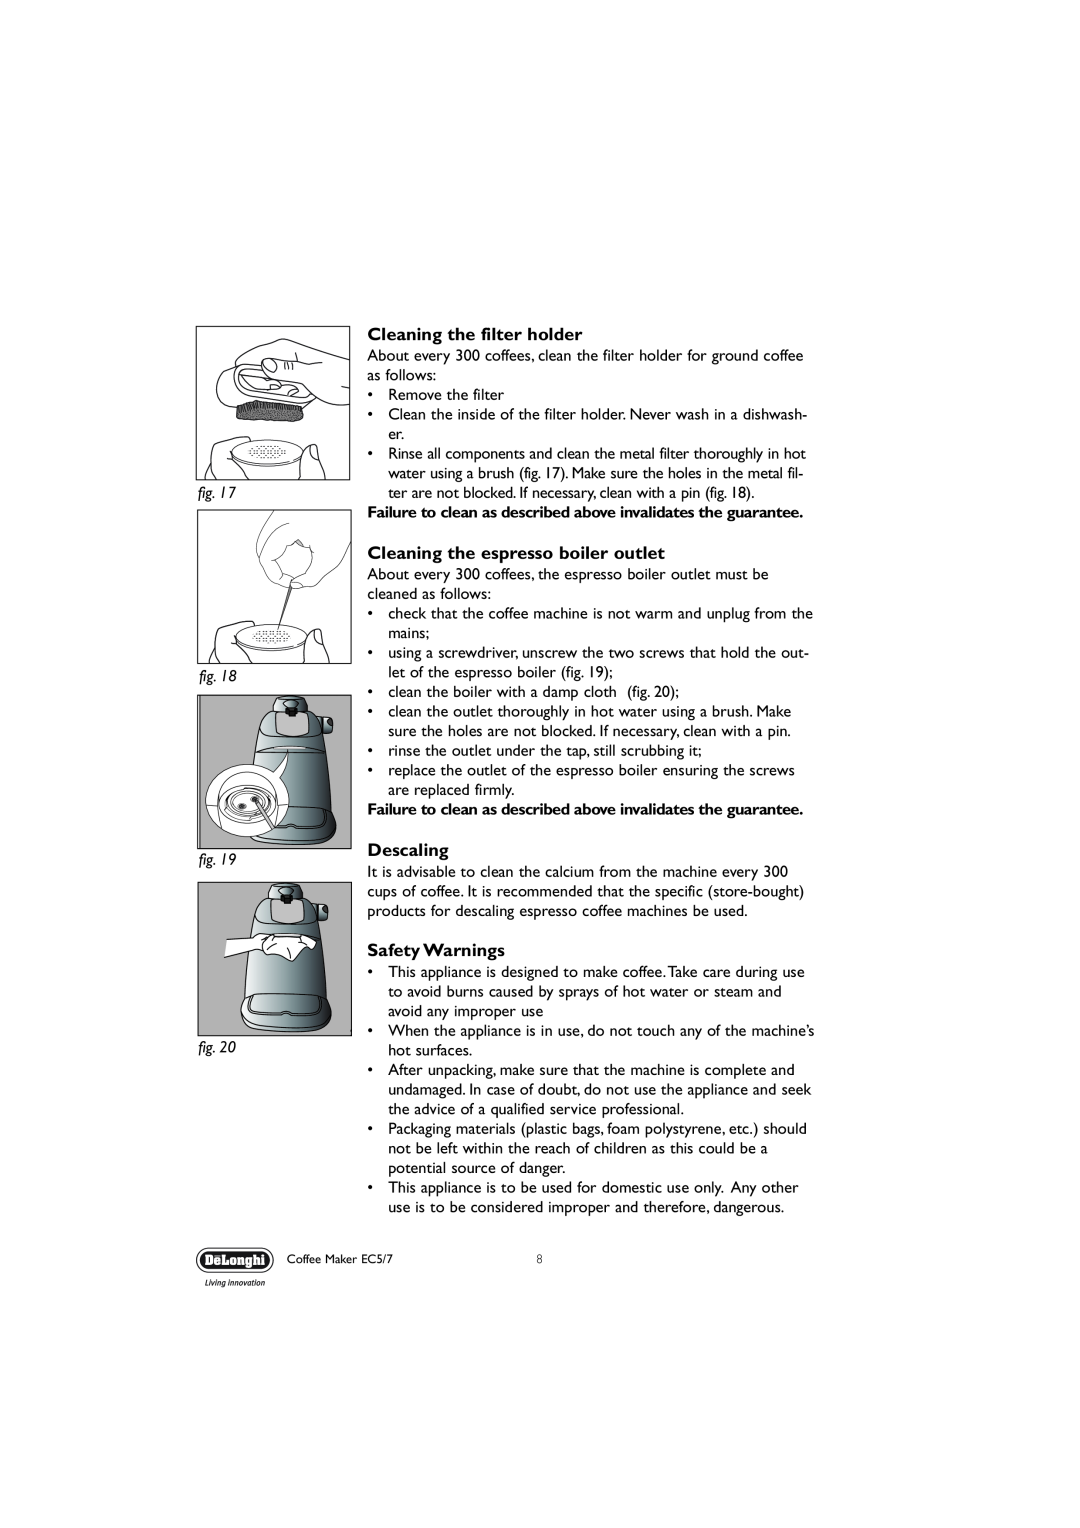 DeLonghi EC5, EC7 manual Cleaning the filter holder, Cleaning the espresso boiler outlet, Descaling, Safety Warnings 